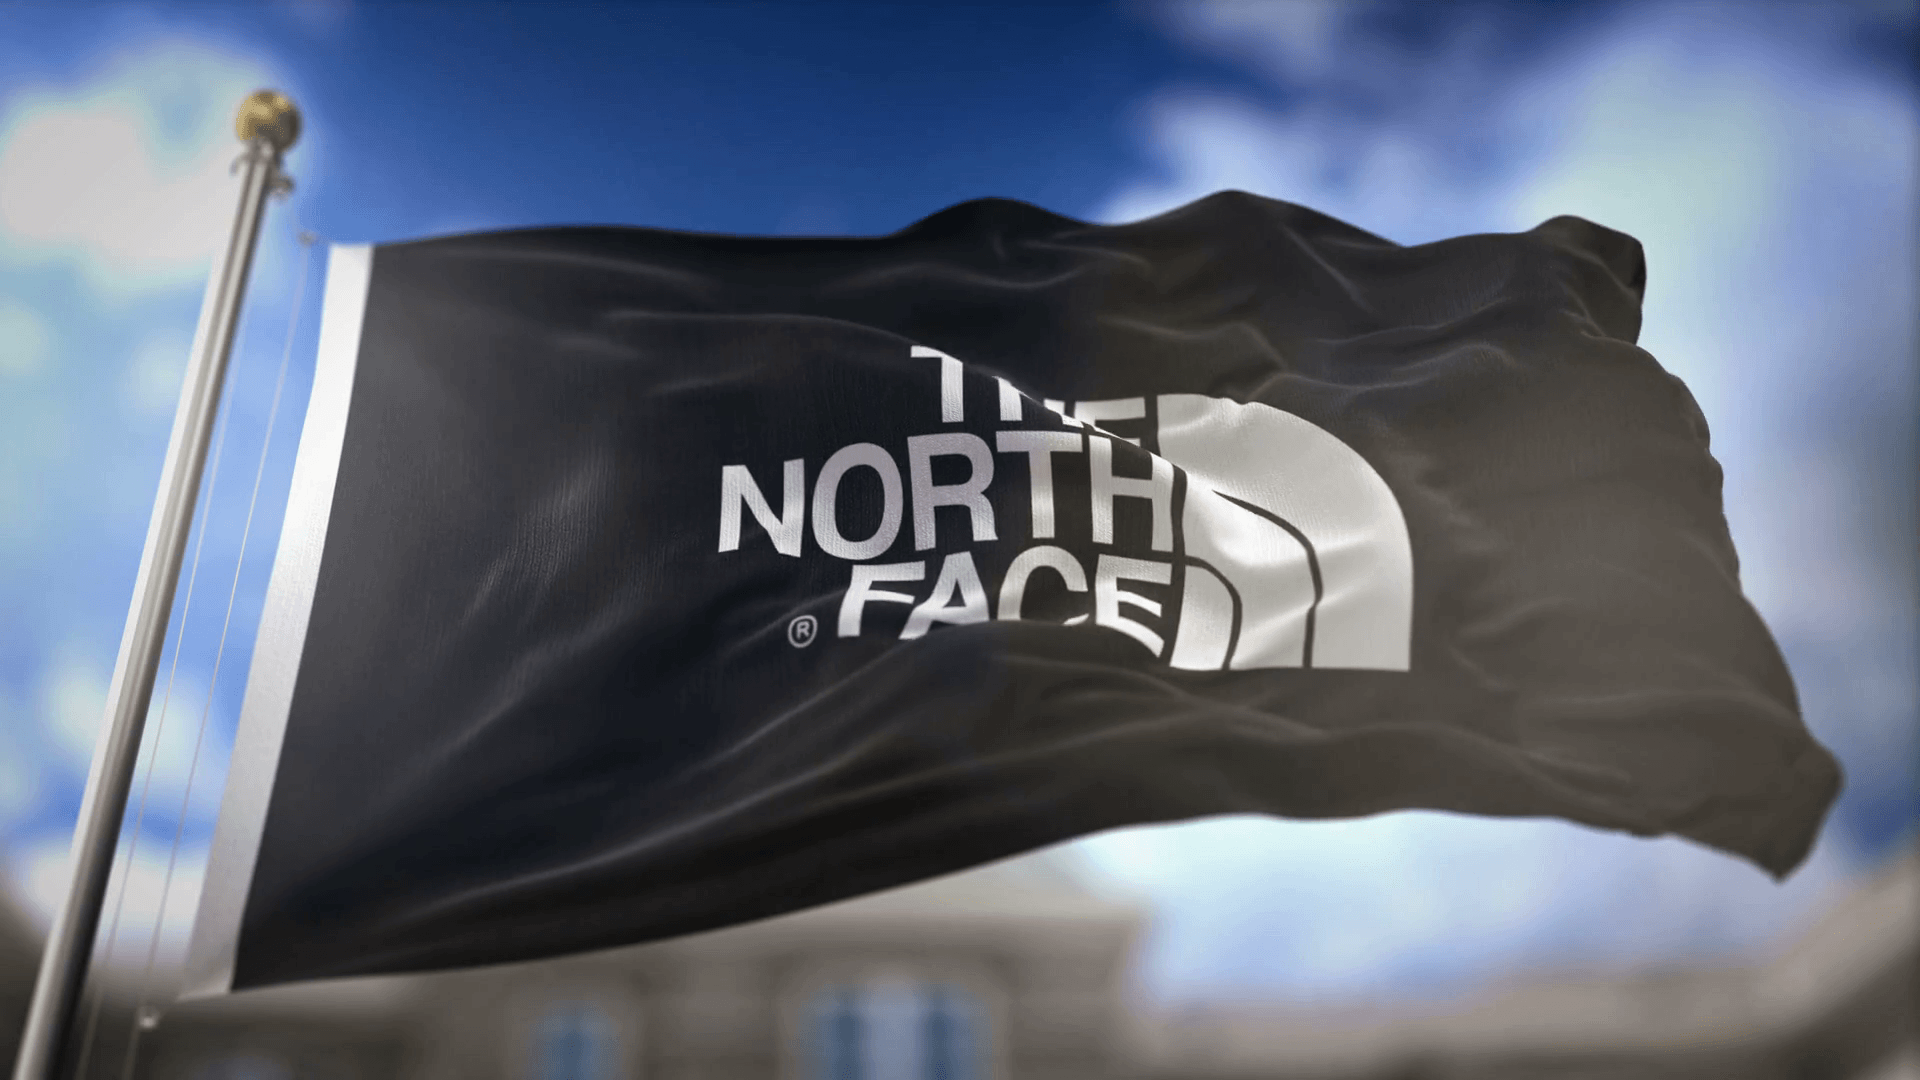 North Face Hd Wallpapers Wallpaper Cave